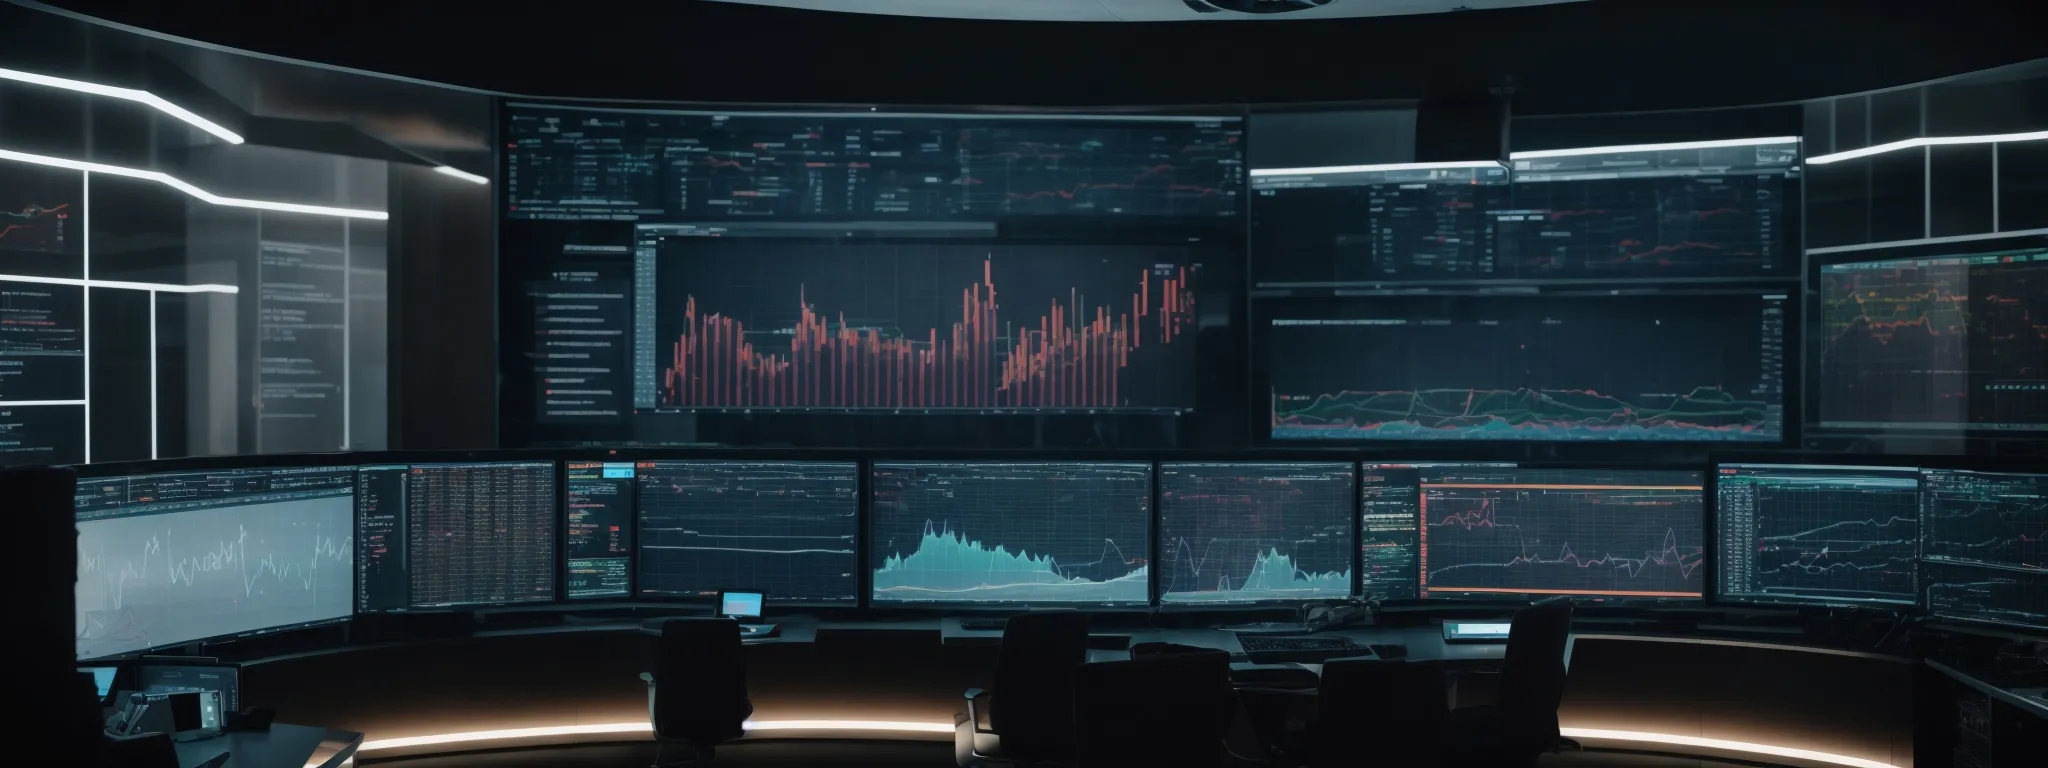 a futuristic control room with screens displaying graphs and marketing analytics, operated by professionals using sophisticated software.